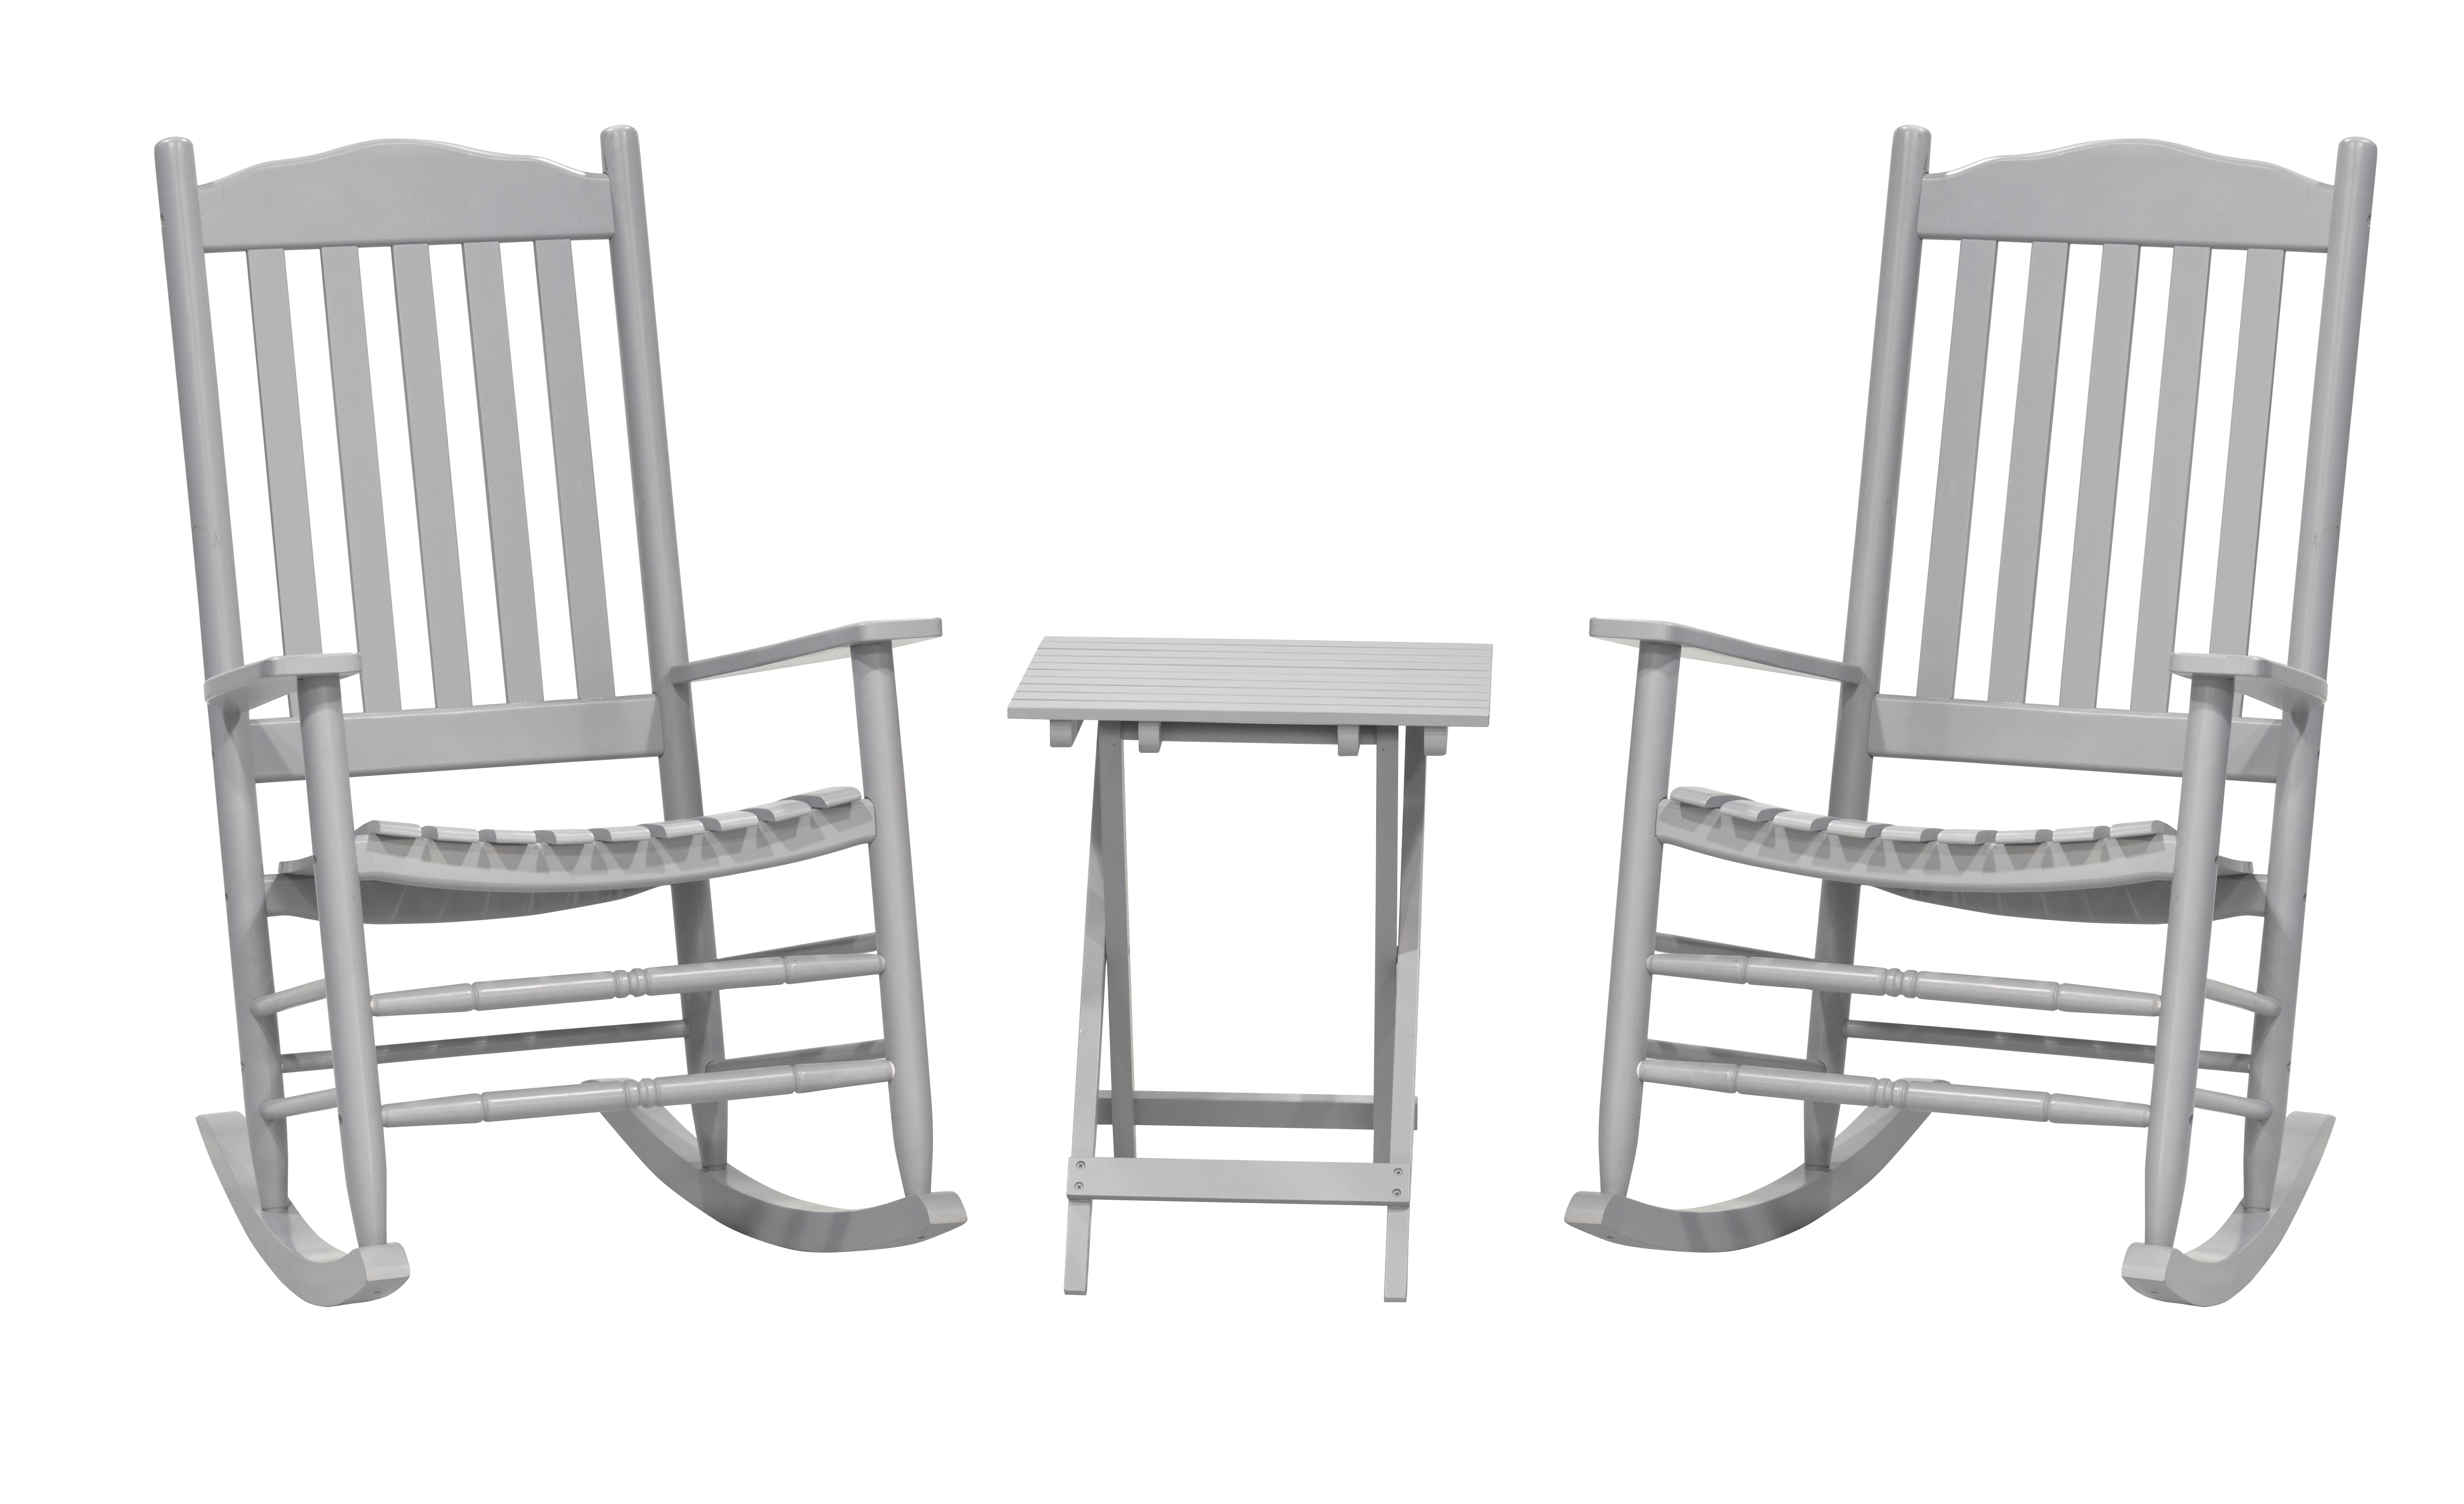 Outdoor Patio Garden Furniture 3-Piece Wood Porch Rocking Chair Set, Weather Resistant Finish, 2 Rocking Chairs and 1 Side Table - Gray - image 2 of 11